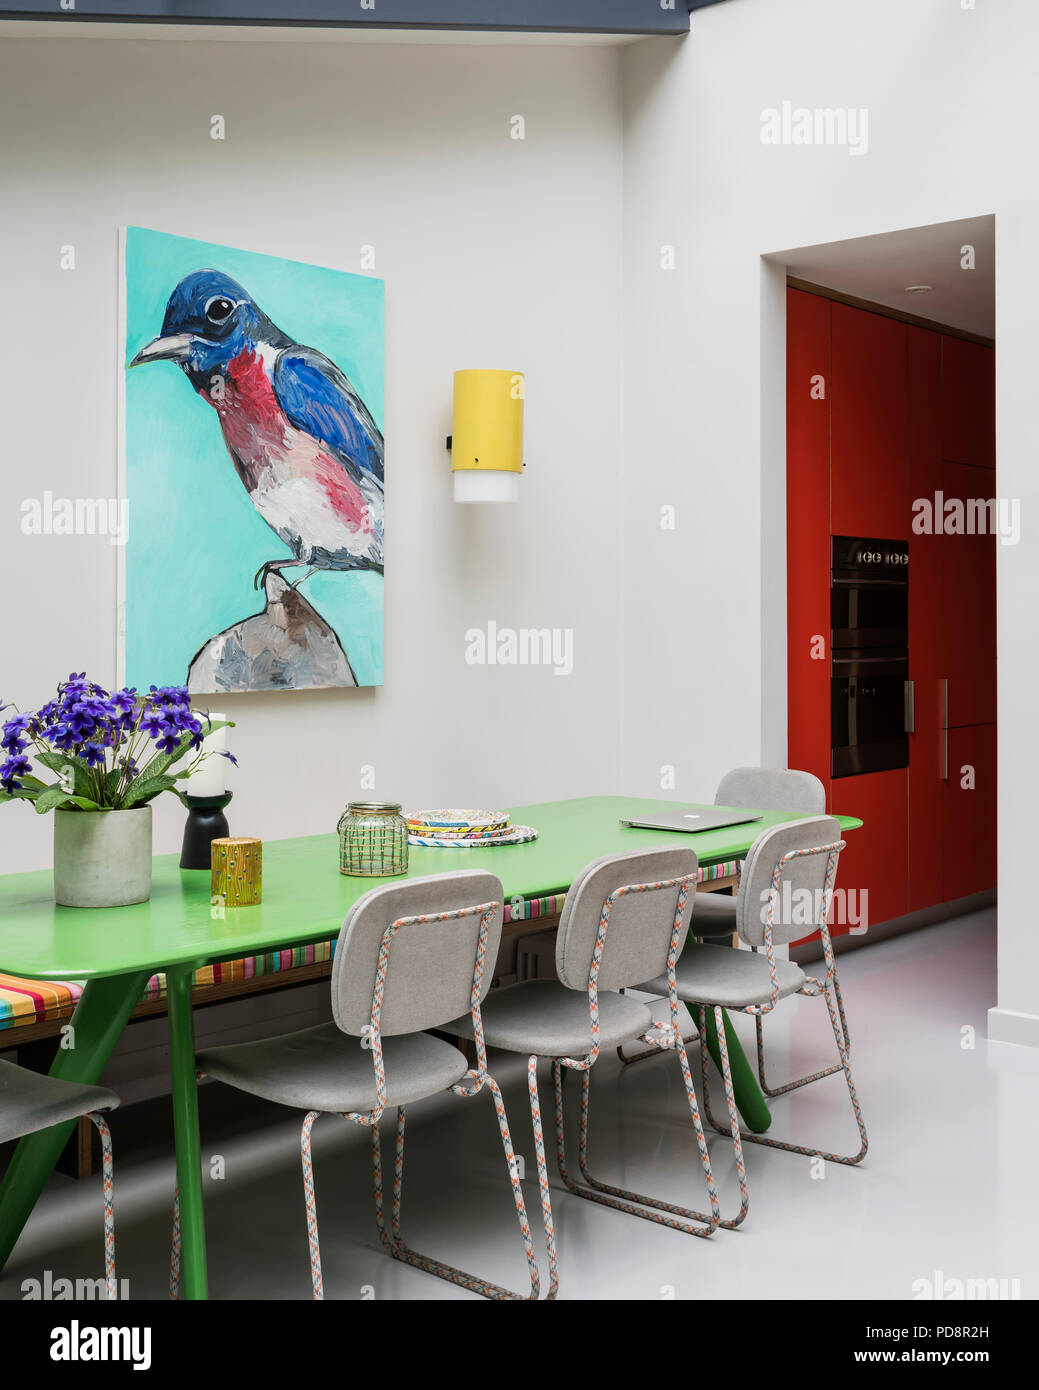 Bird portrait by James Franco keeps watch over the custom green-painted table by Tom Dixon and chairs from Moooi. Stock Photo